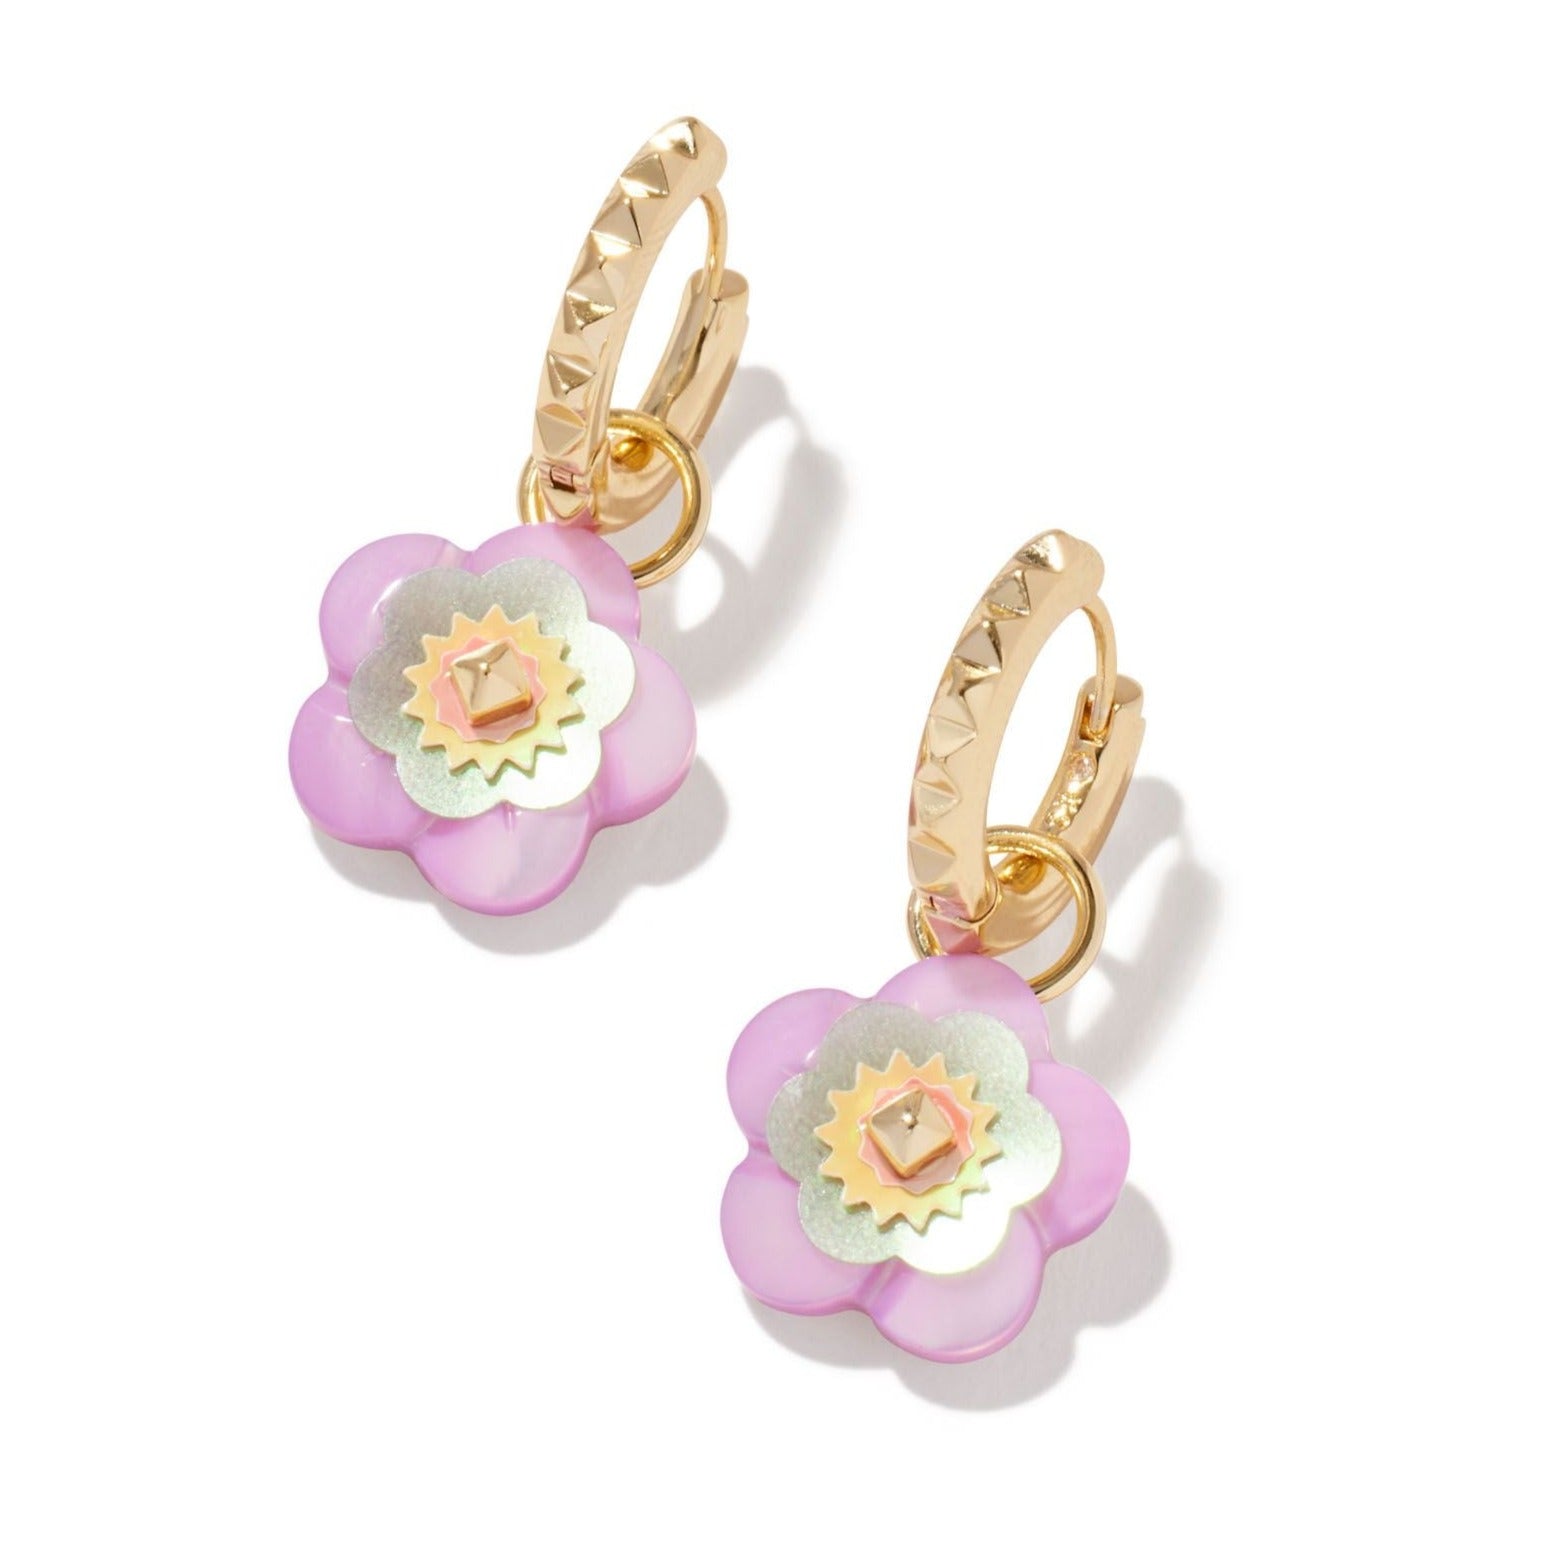 Kendra Scott | Deliah Gold Huggie Earrings in Pastel Mix - Giddy Up Glamour Boutique